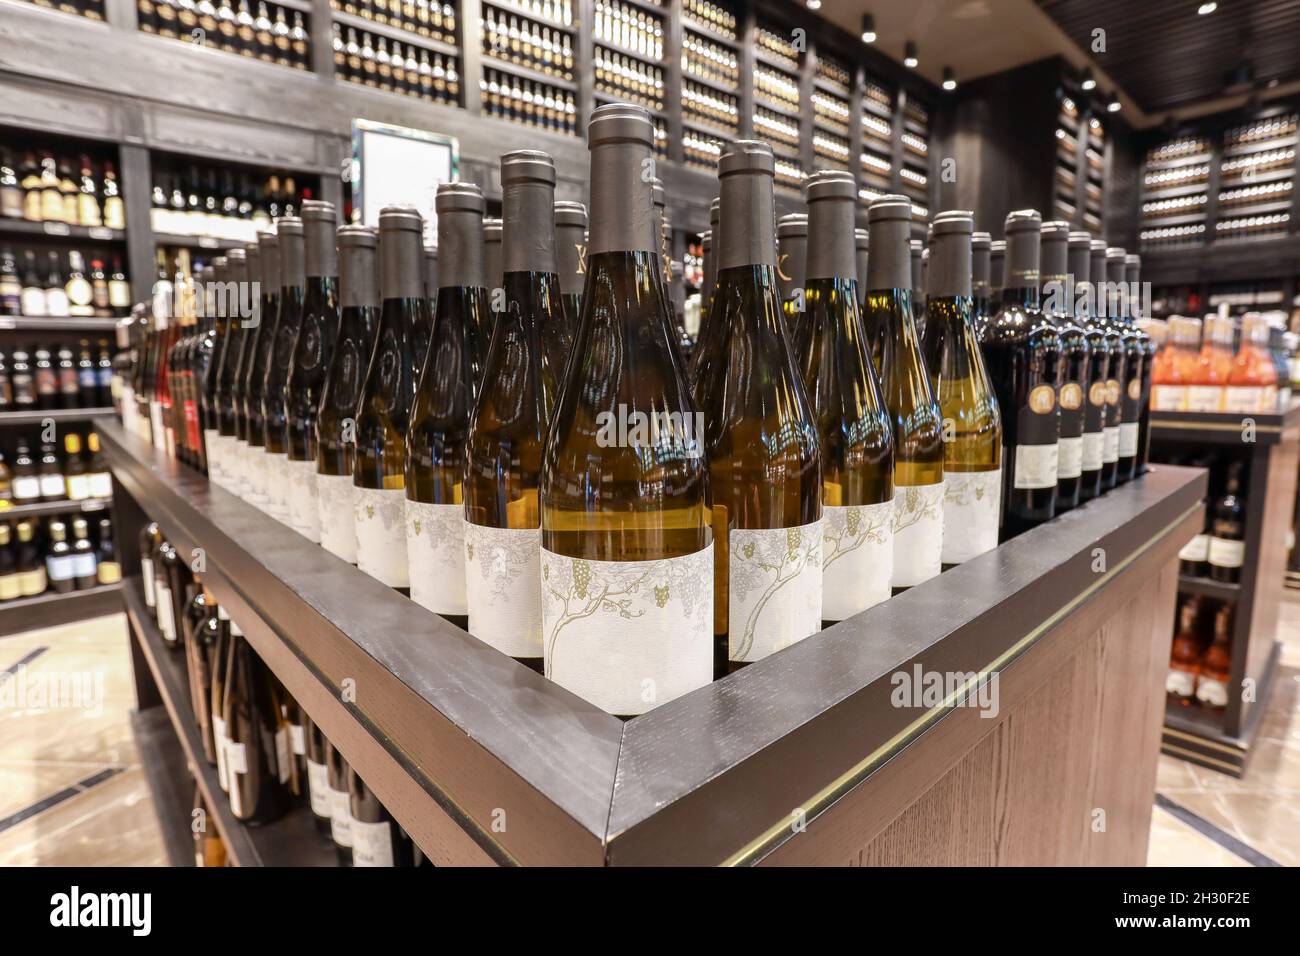 Several alcoholic beverage bottles in a liquor store. Stock Photo